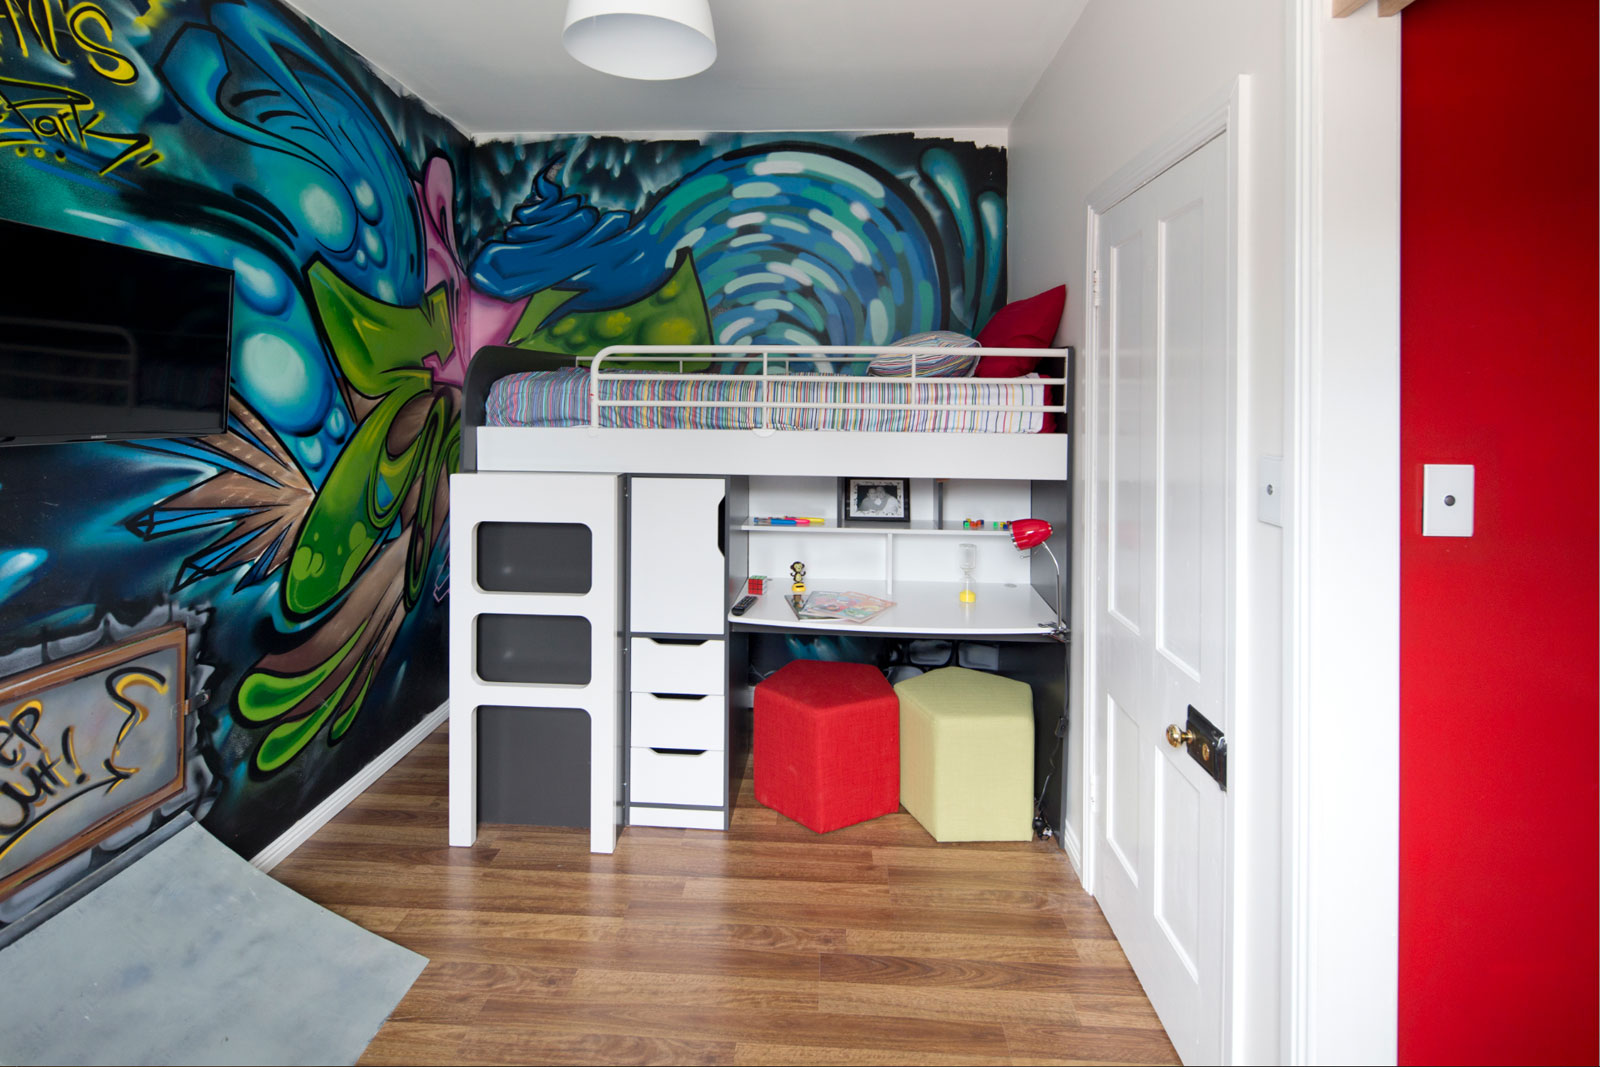 Kids Bedroom Wall Mesmerizing Kids Bedroom Applying Graffiti Wall Design Of Kids Chat Rooms Furnished With Bunk Bed Combined With Desk Completed With Spot Table Lamp And Unique Chairs Kids Room Design And Furniture Of Kids Chat Rooms